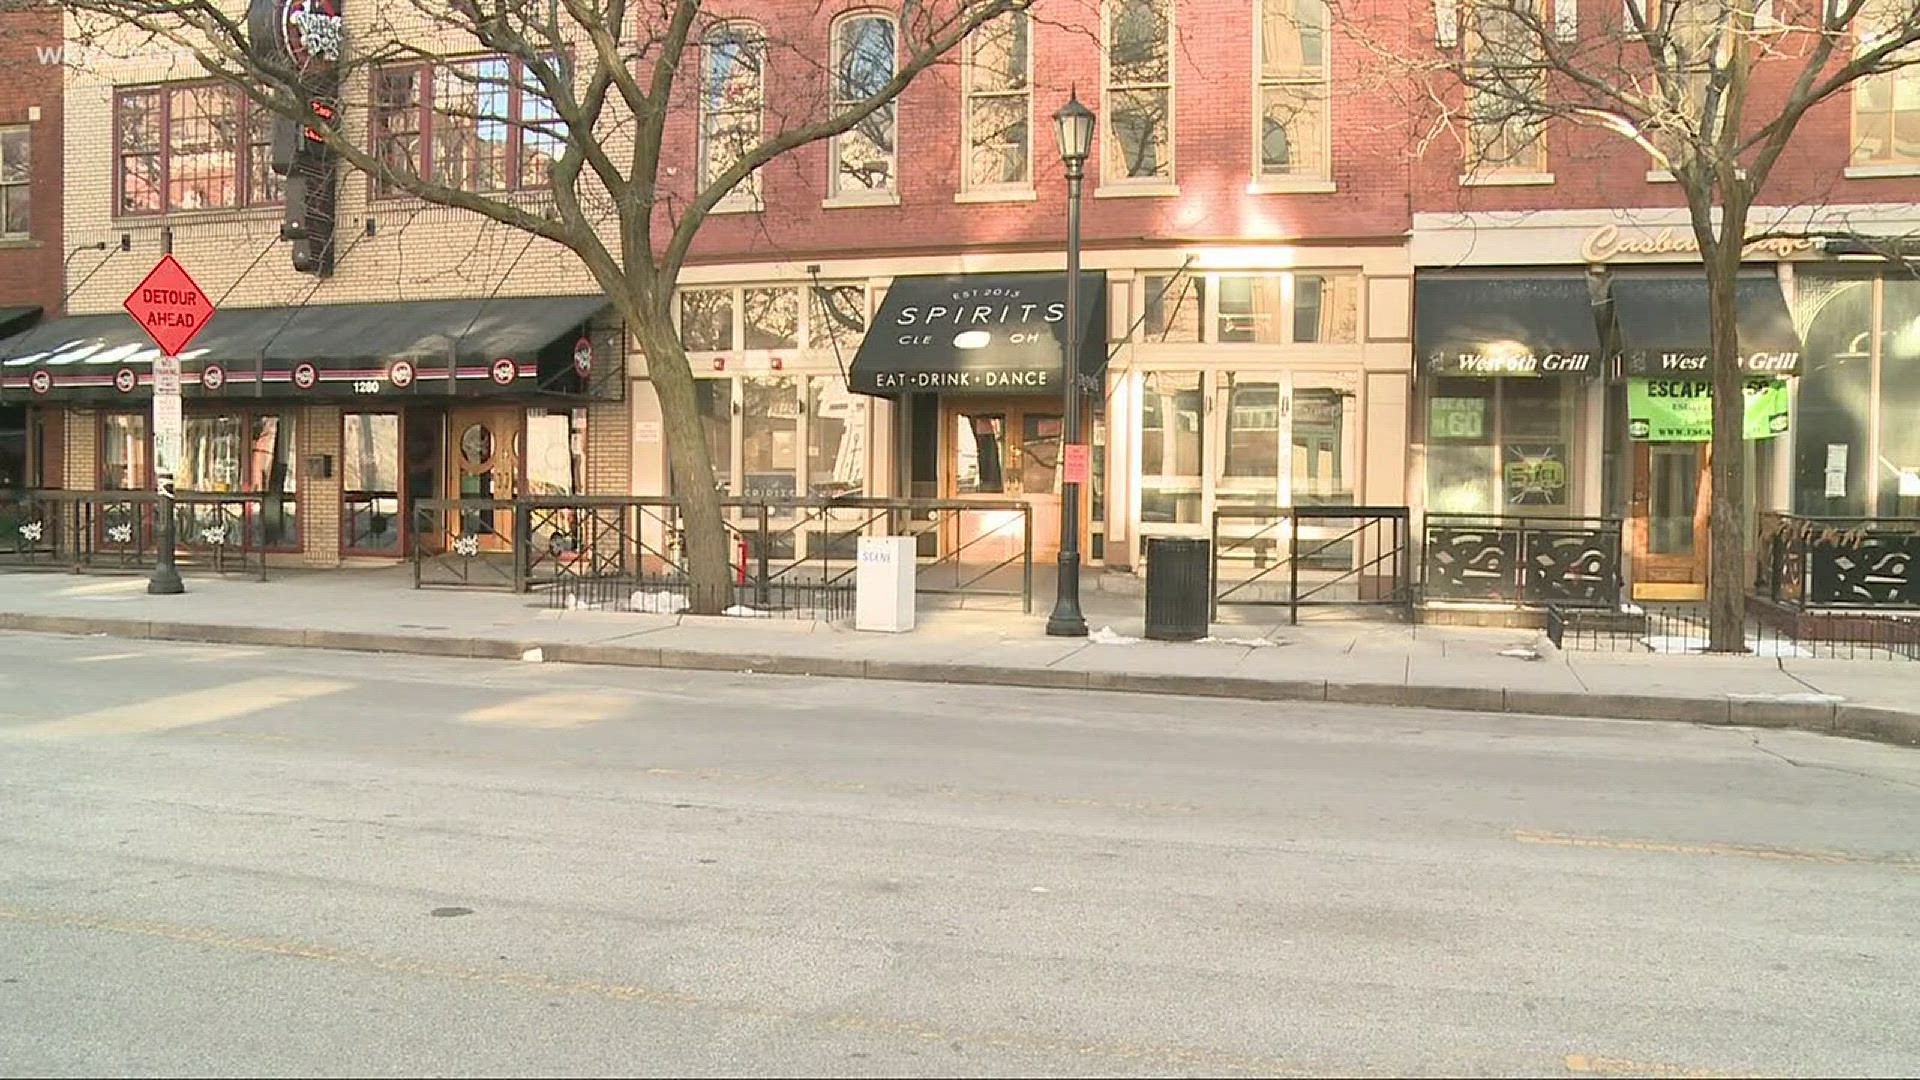 How are Cleveland's bars preparing for St. Patrick's Day after last year's incident?